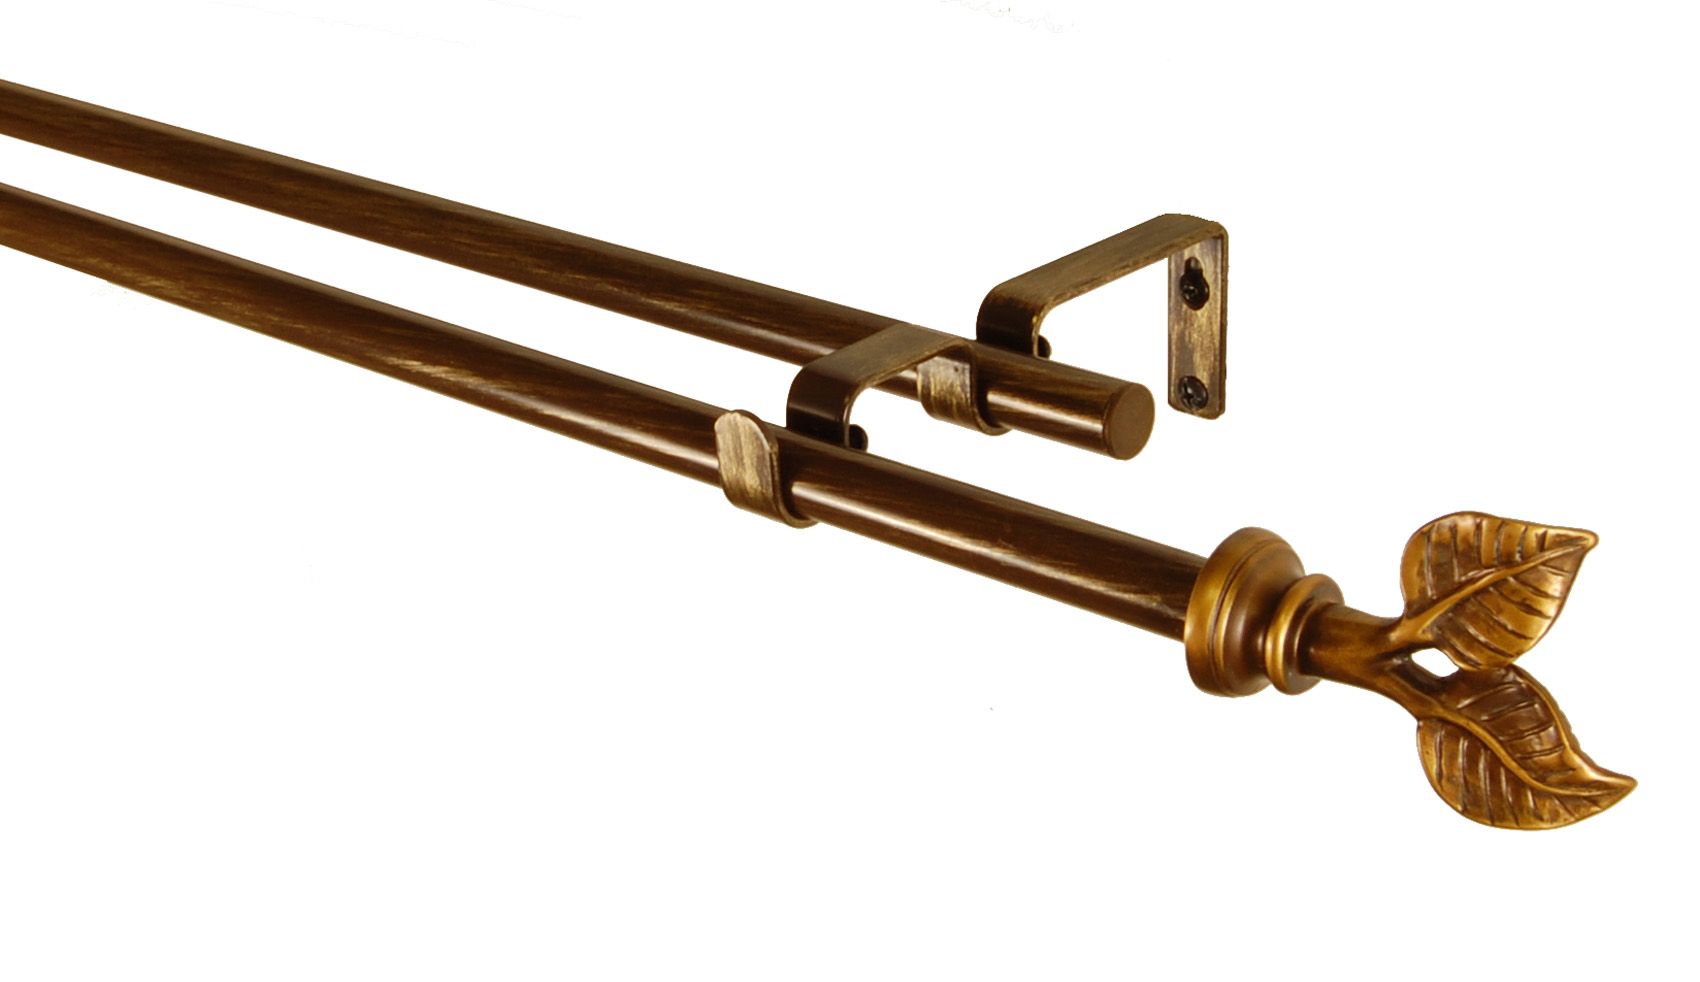 BCL Leaf Double Curtain Rod, Antique Gold Finish, 86-inch to 120-inch